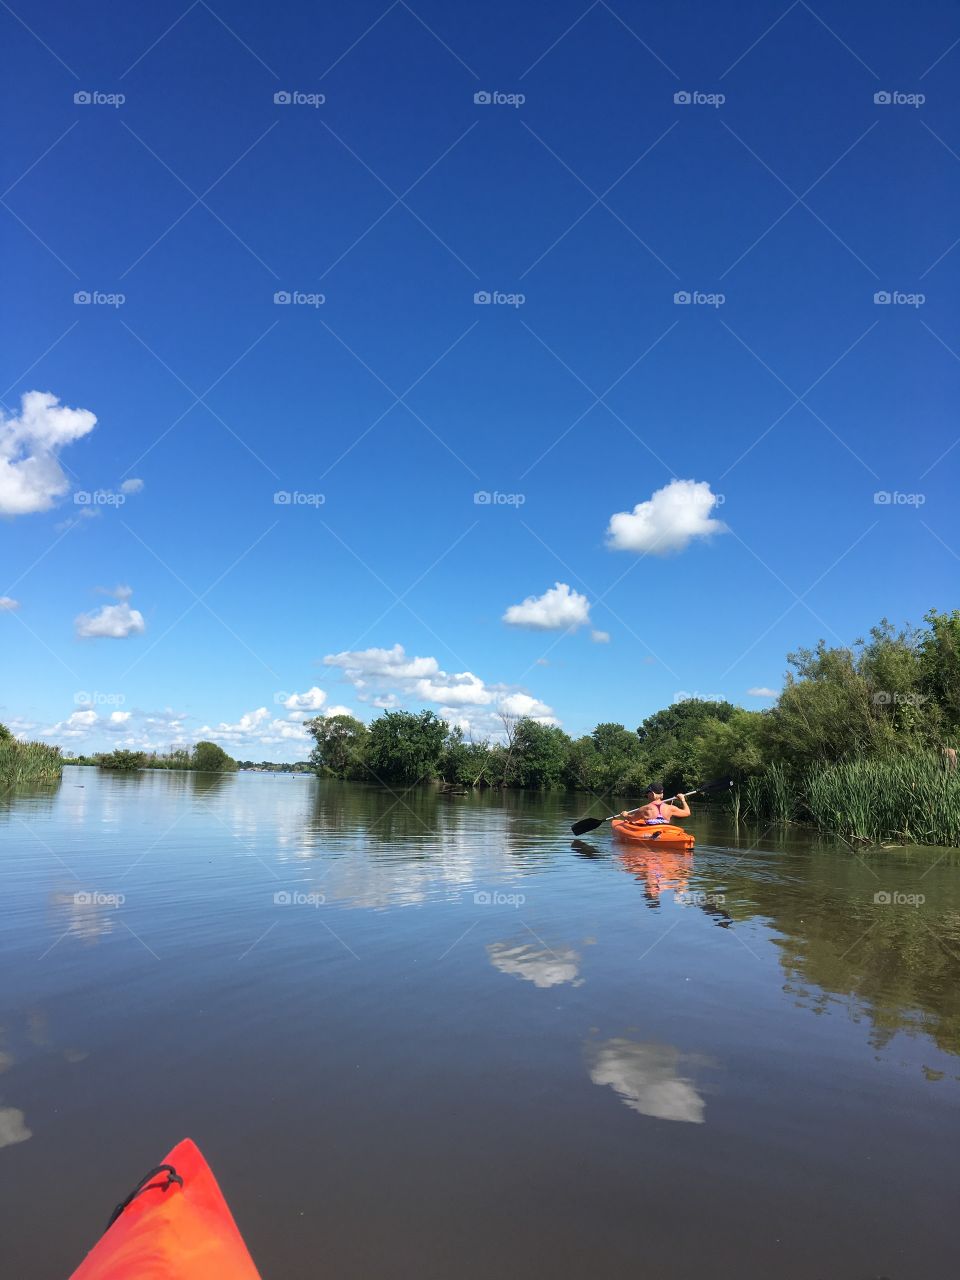 Woman kayaking on a smooth channel with green vegetation, blue skies & puffy white clouds.